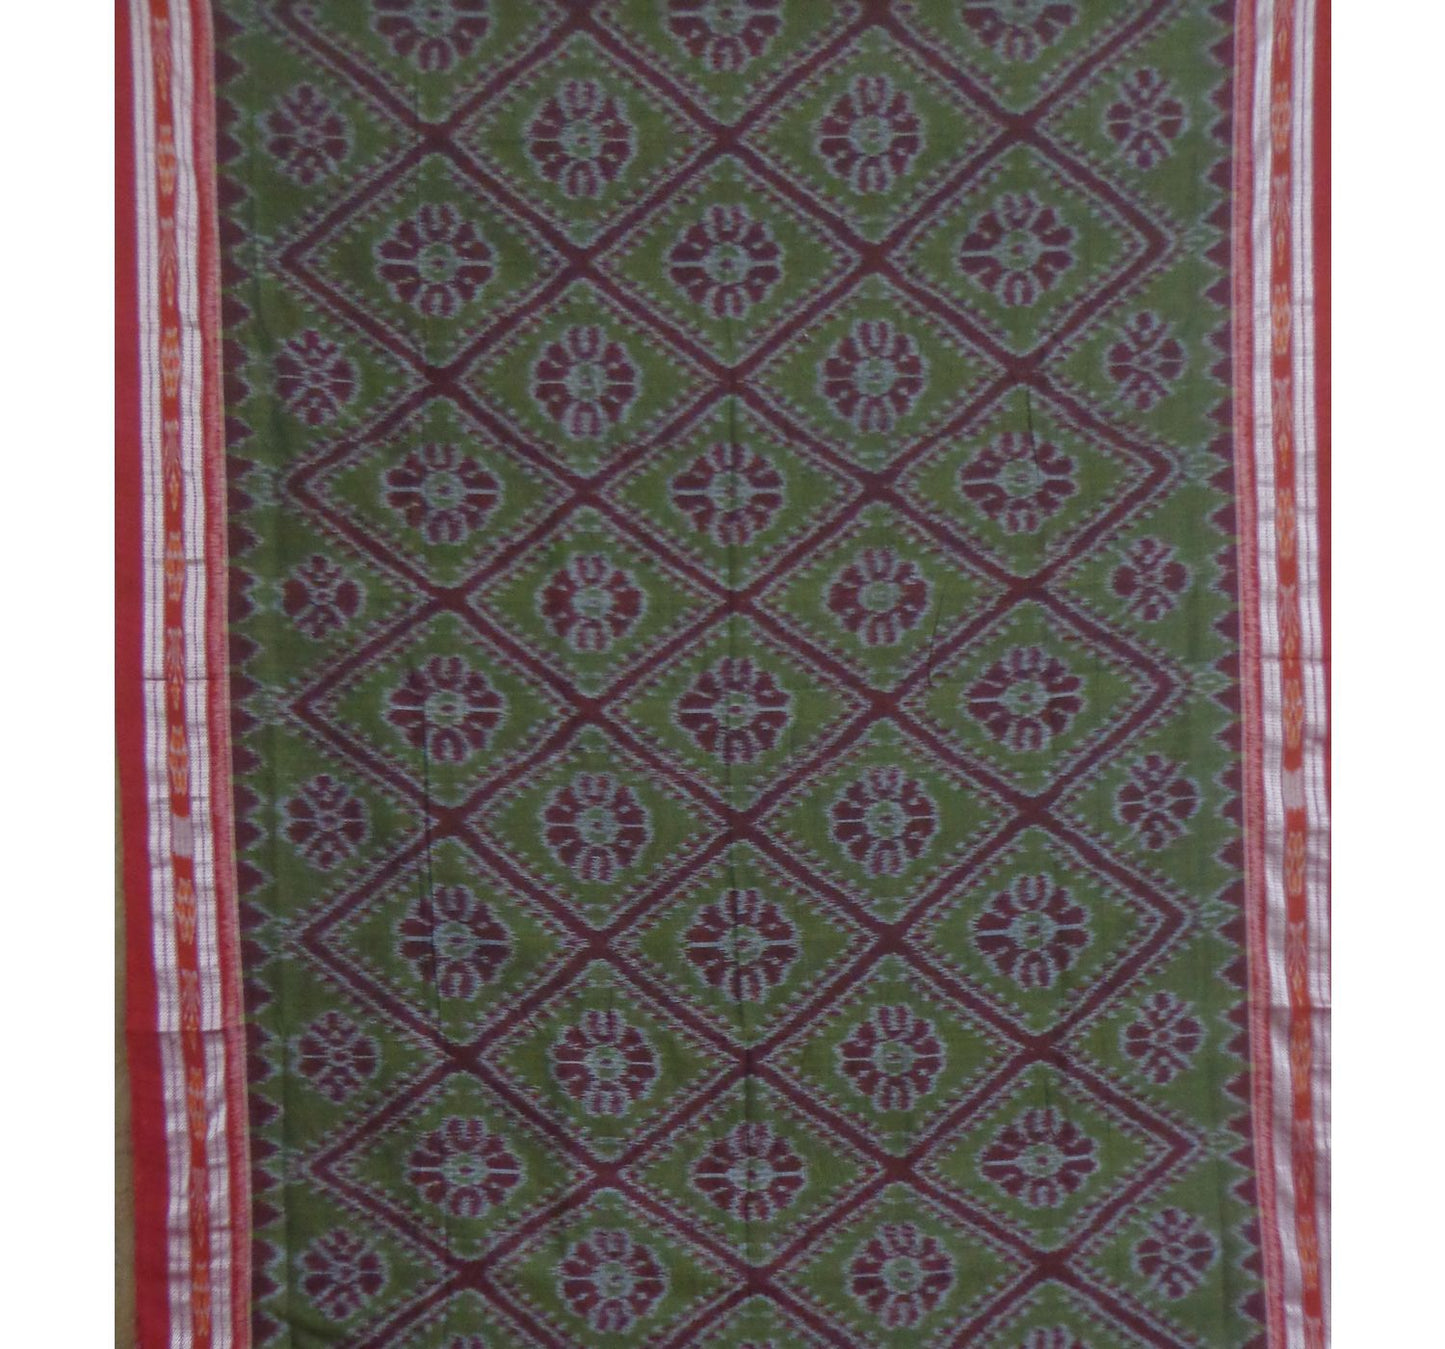 Olive Green with Maroon Handwoven Cotton Saree